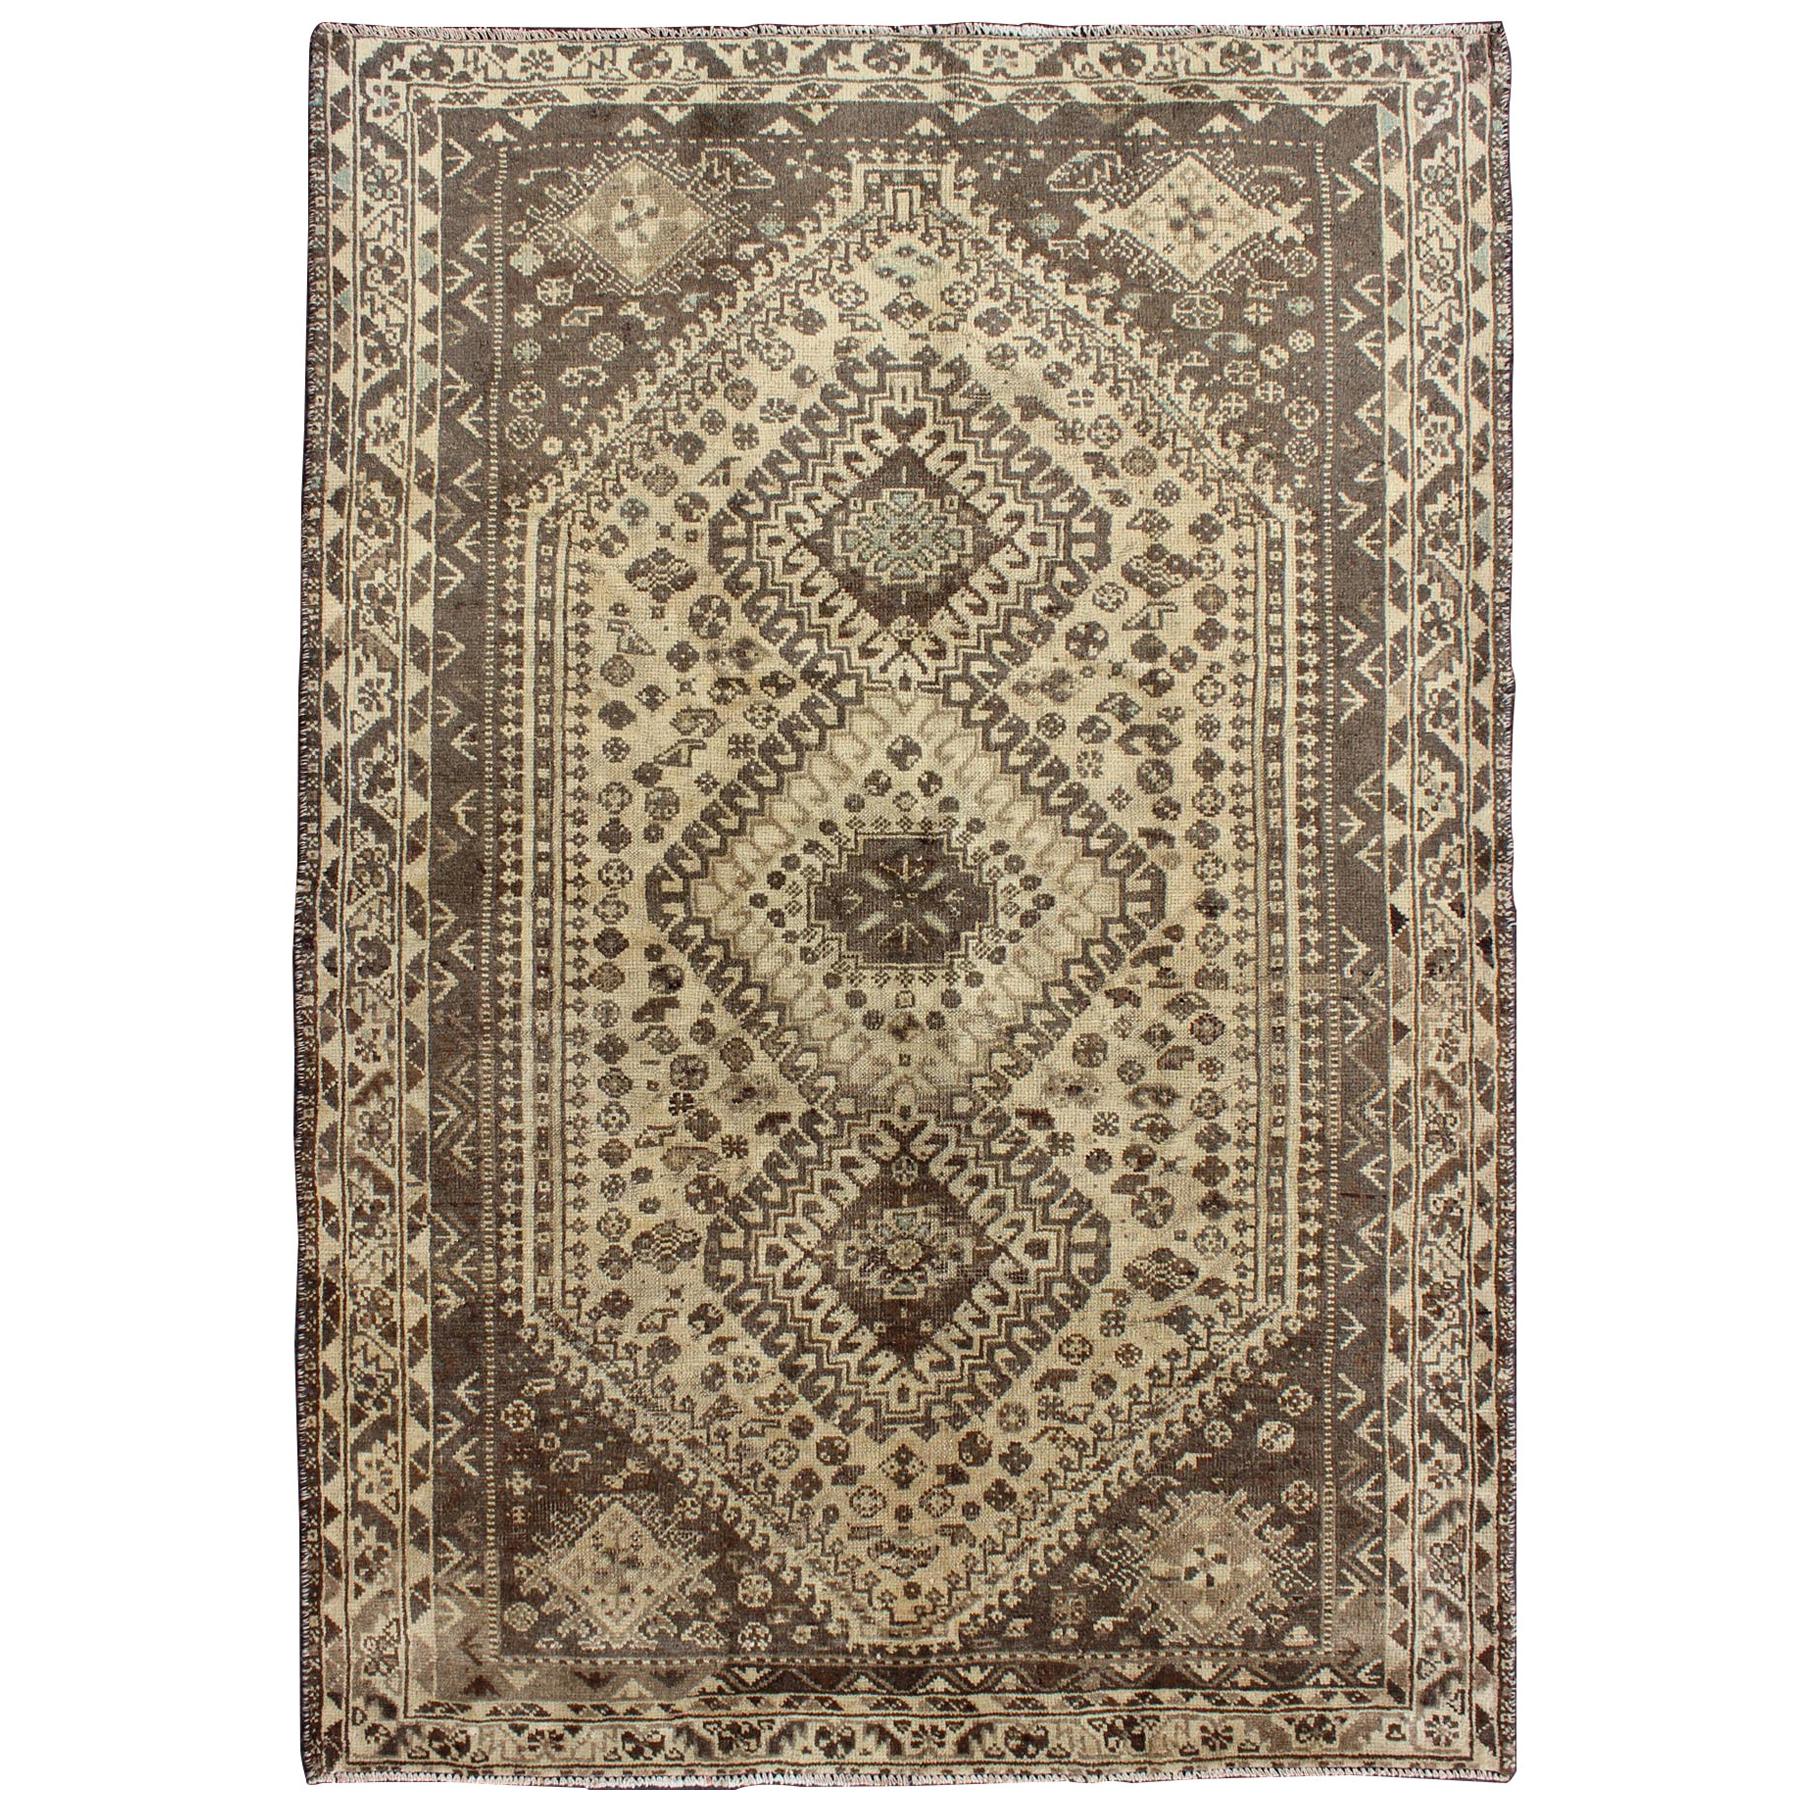 Earth Tones Vintage Persian Shiraz with Tribal Design and Neutral Colors